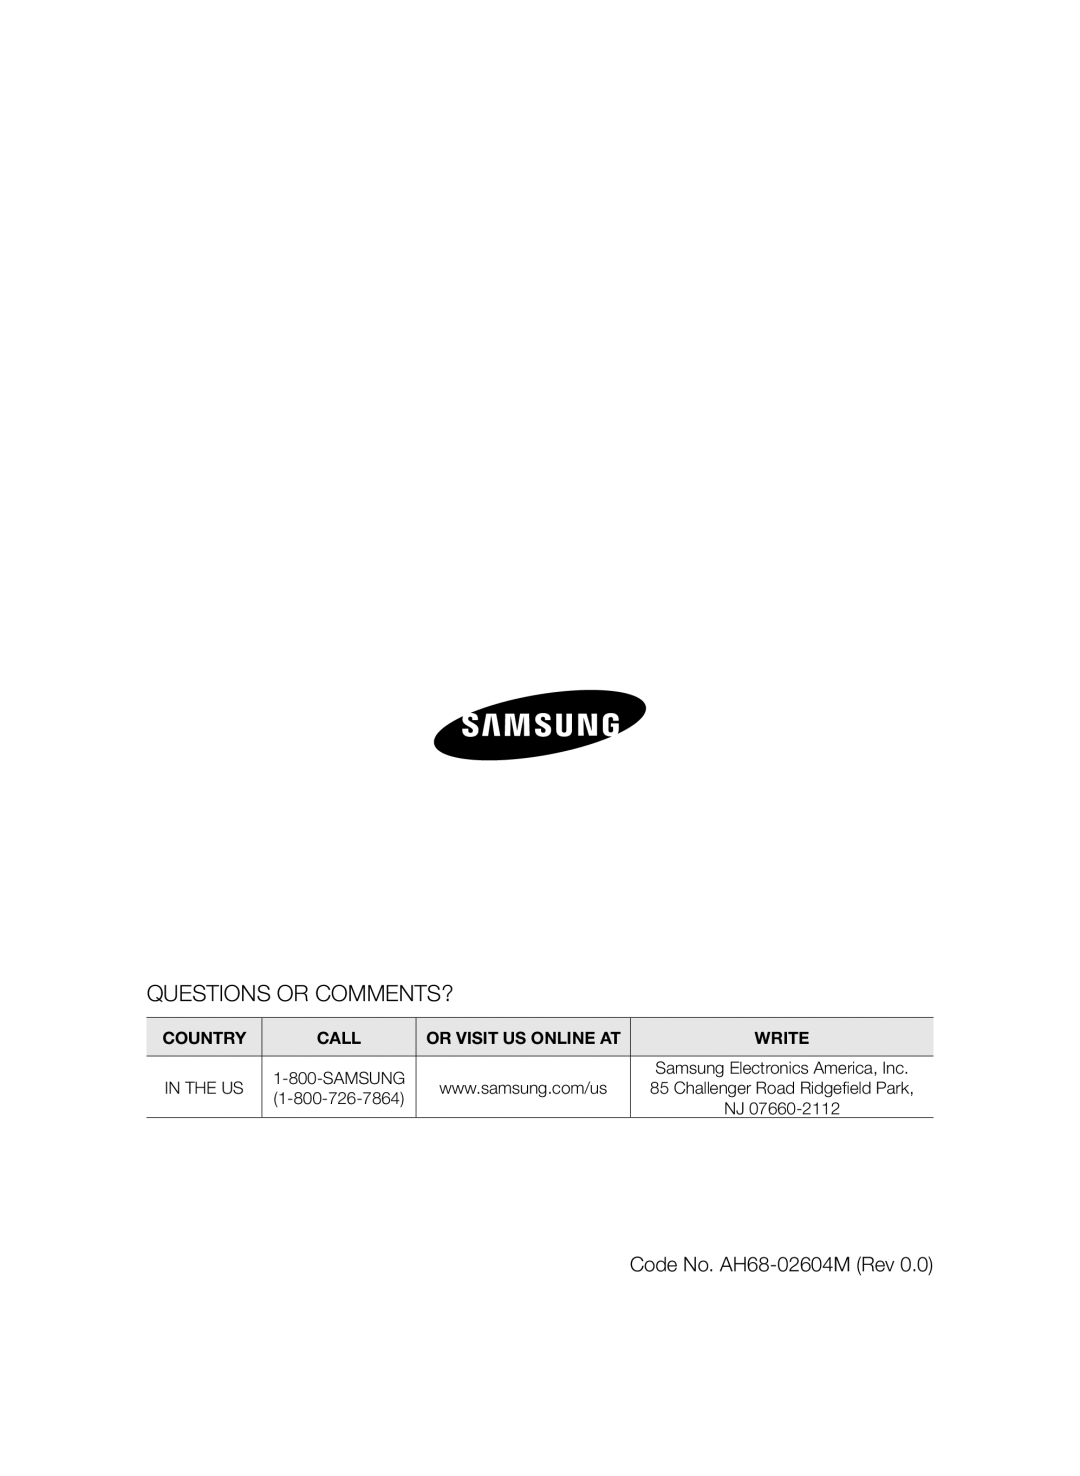 Samsung MXF630BZA user manual Questions Or Comments?, Code No. AH68-02604MRev, Country, Call, Or Visit Us Online At, Write 